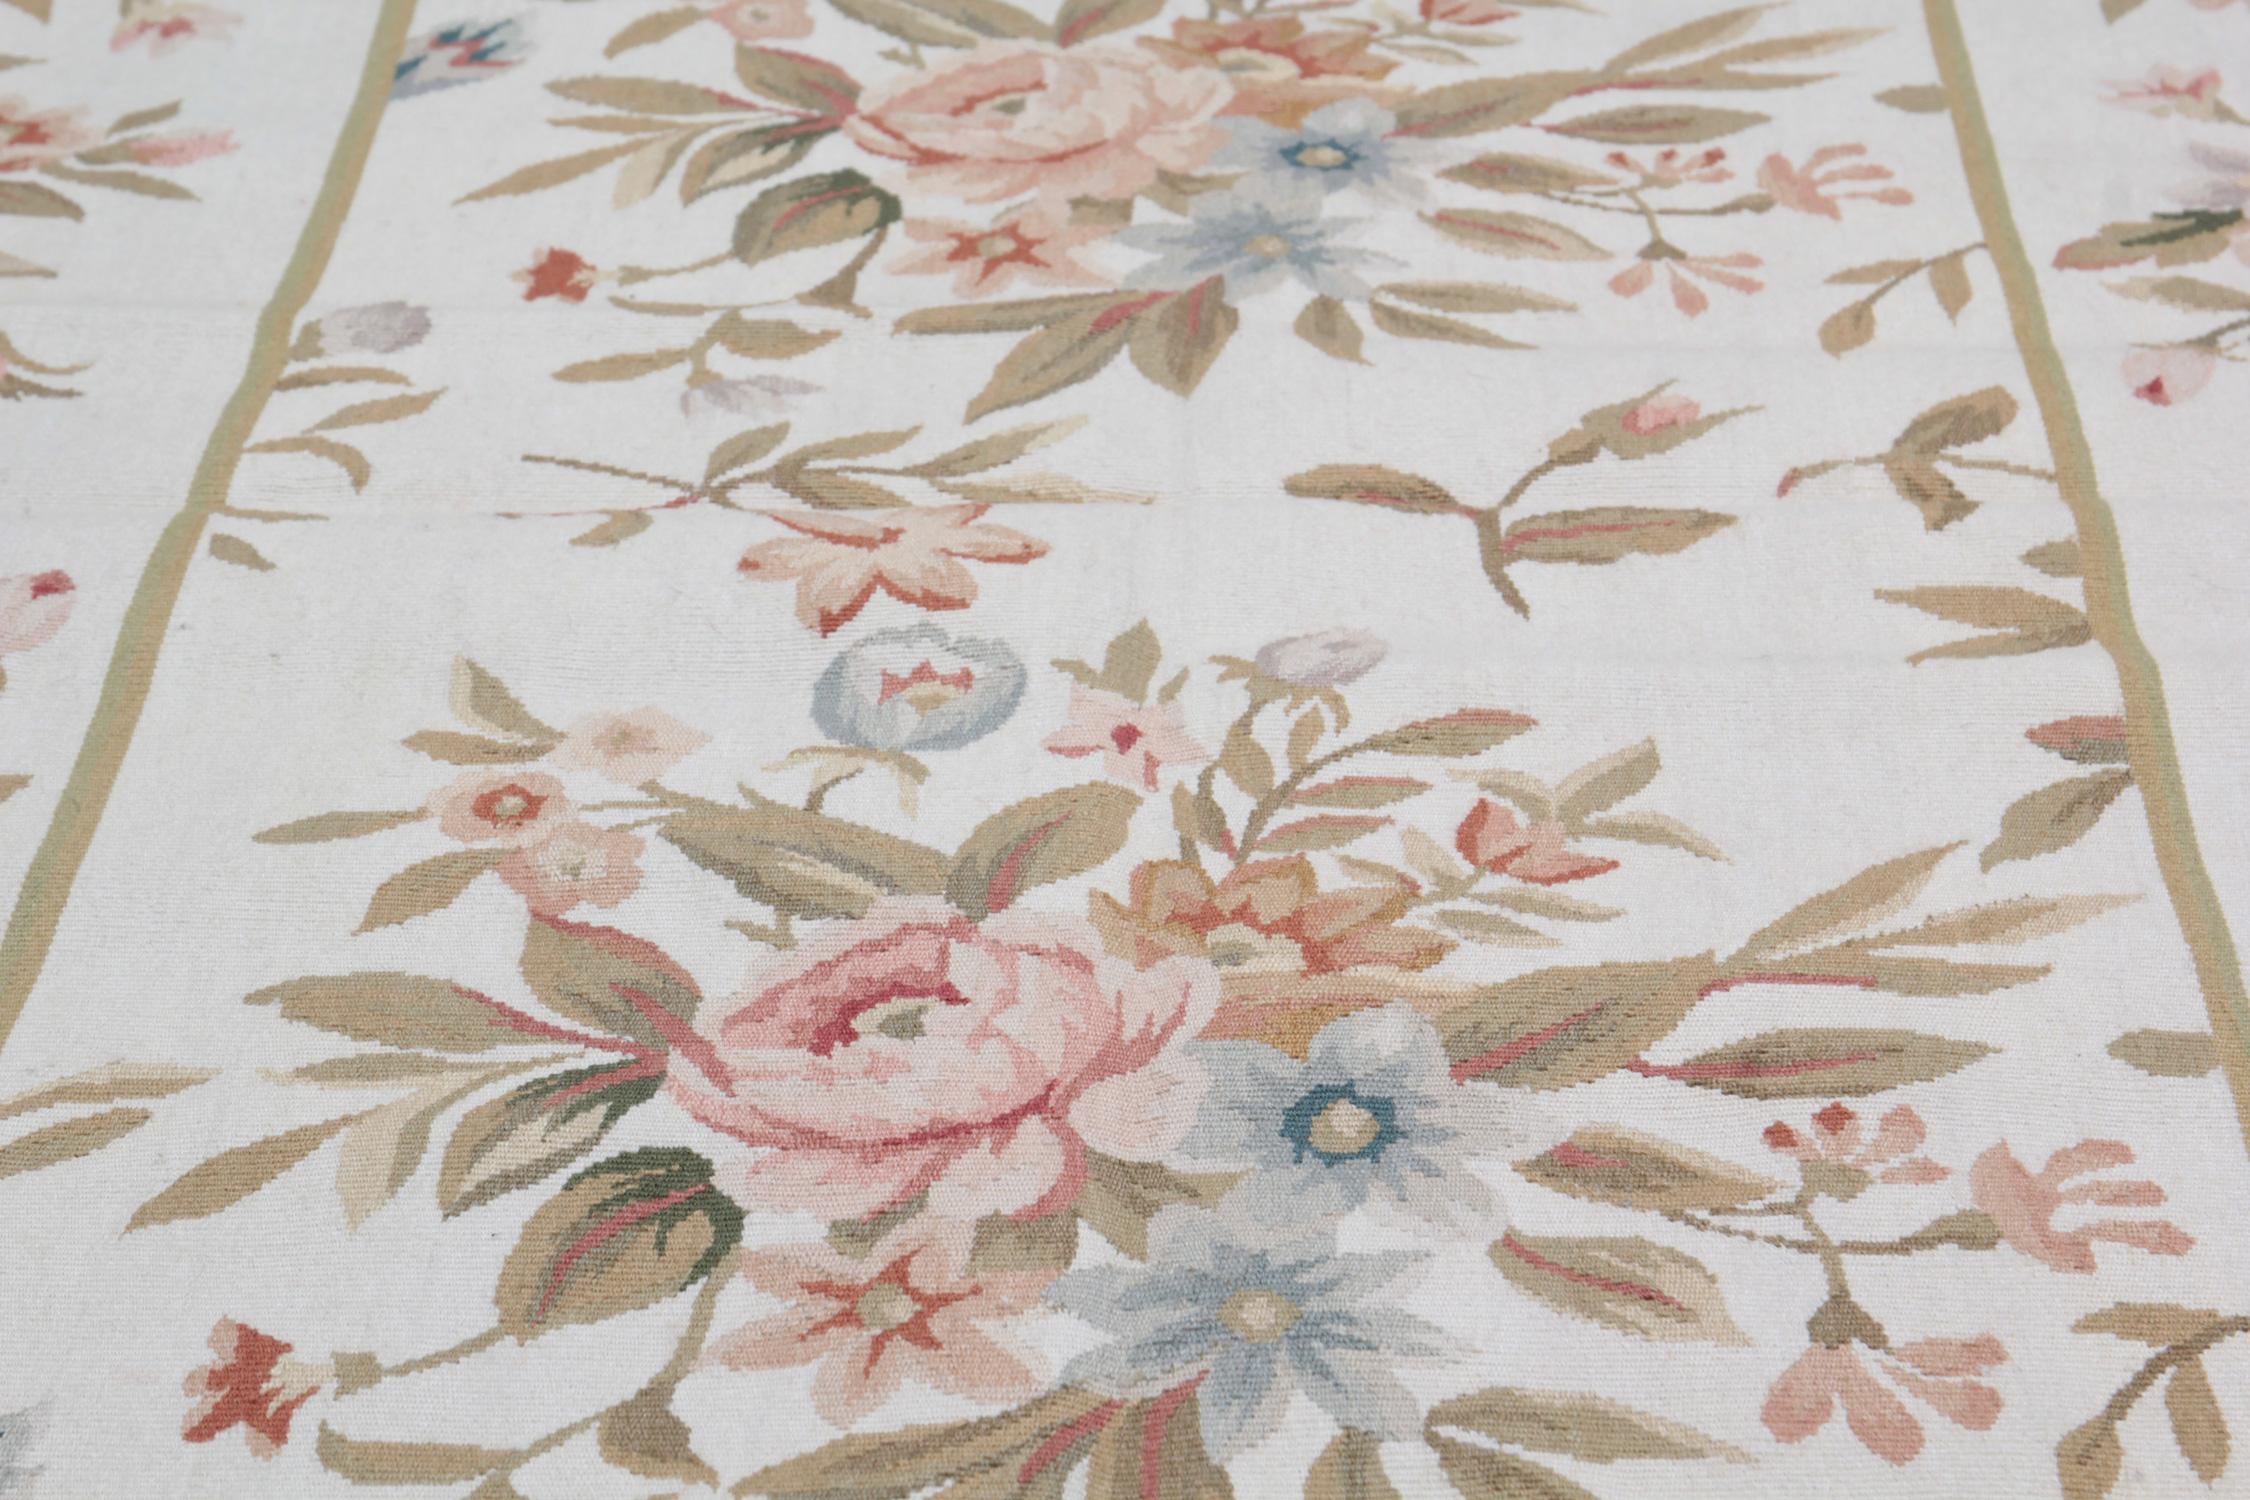 Chinese Handmade Rug, Floral Patterned Rug, Aubusson Style Rugs, Needlepoint Flat-Weave